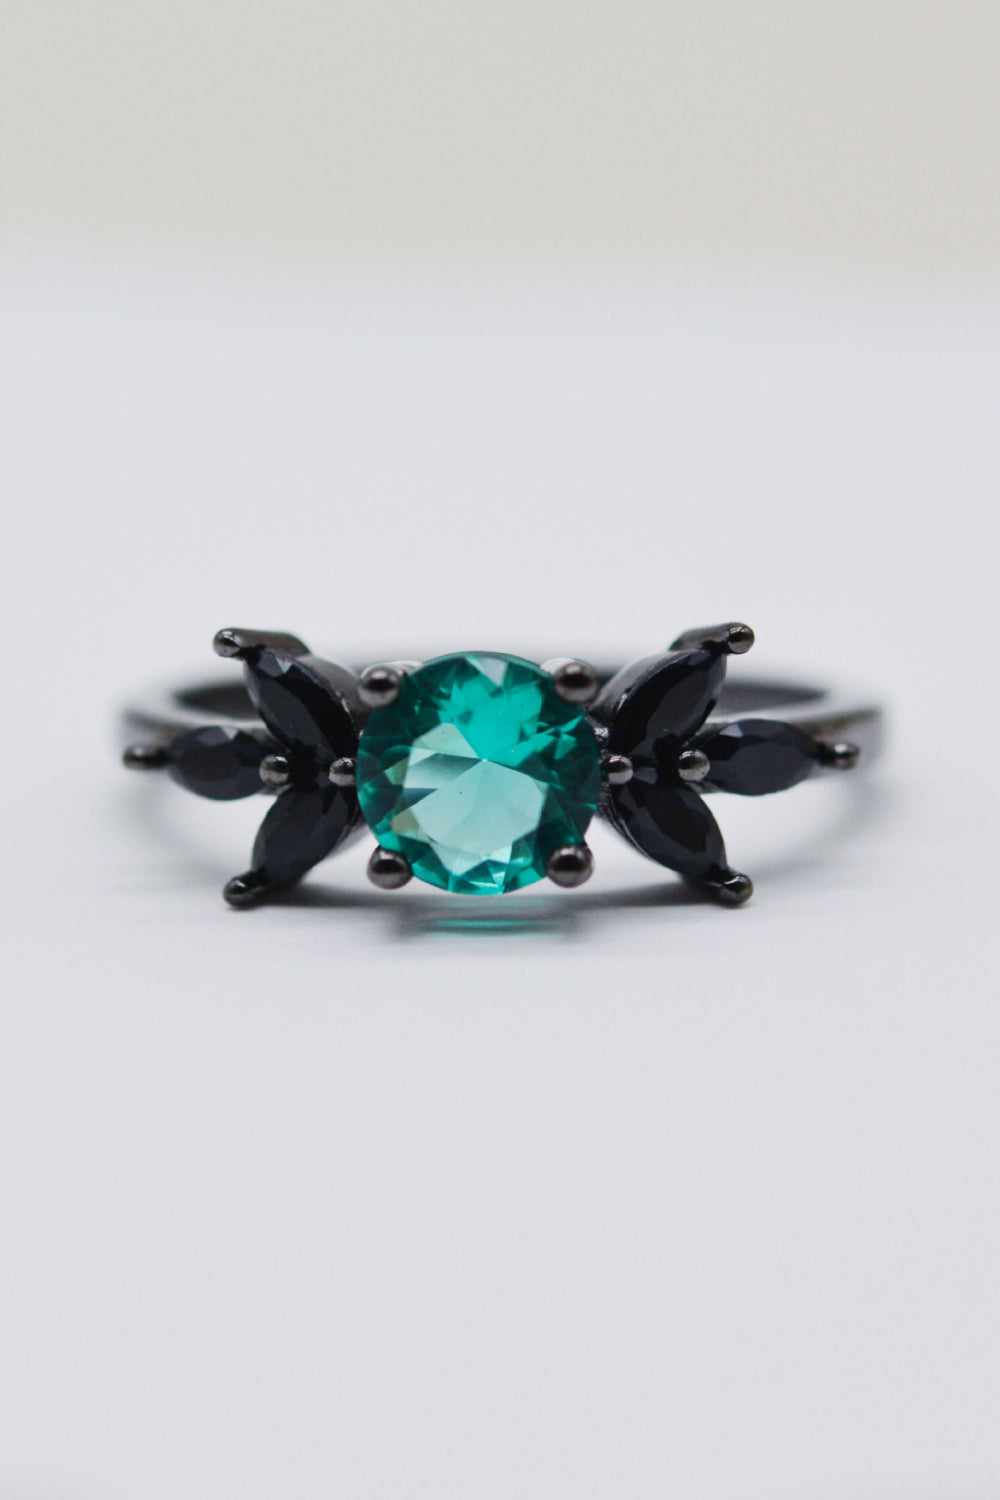 - Paraiba Tourmaline and Zircon Leaf Ring - ring at TFC&H Co.